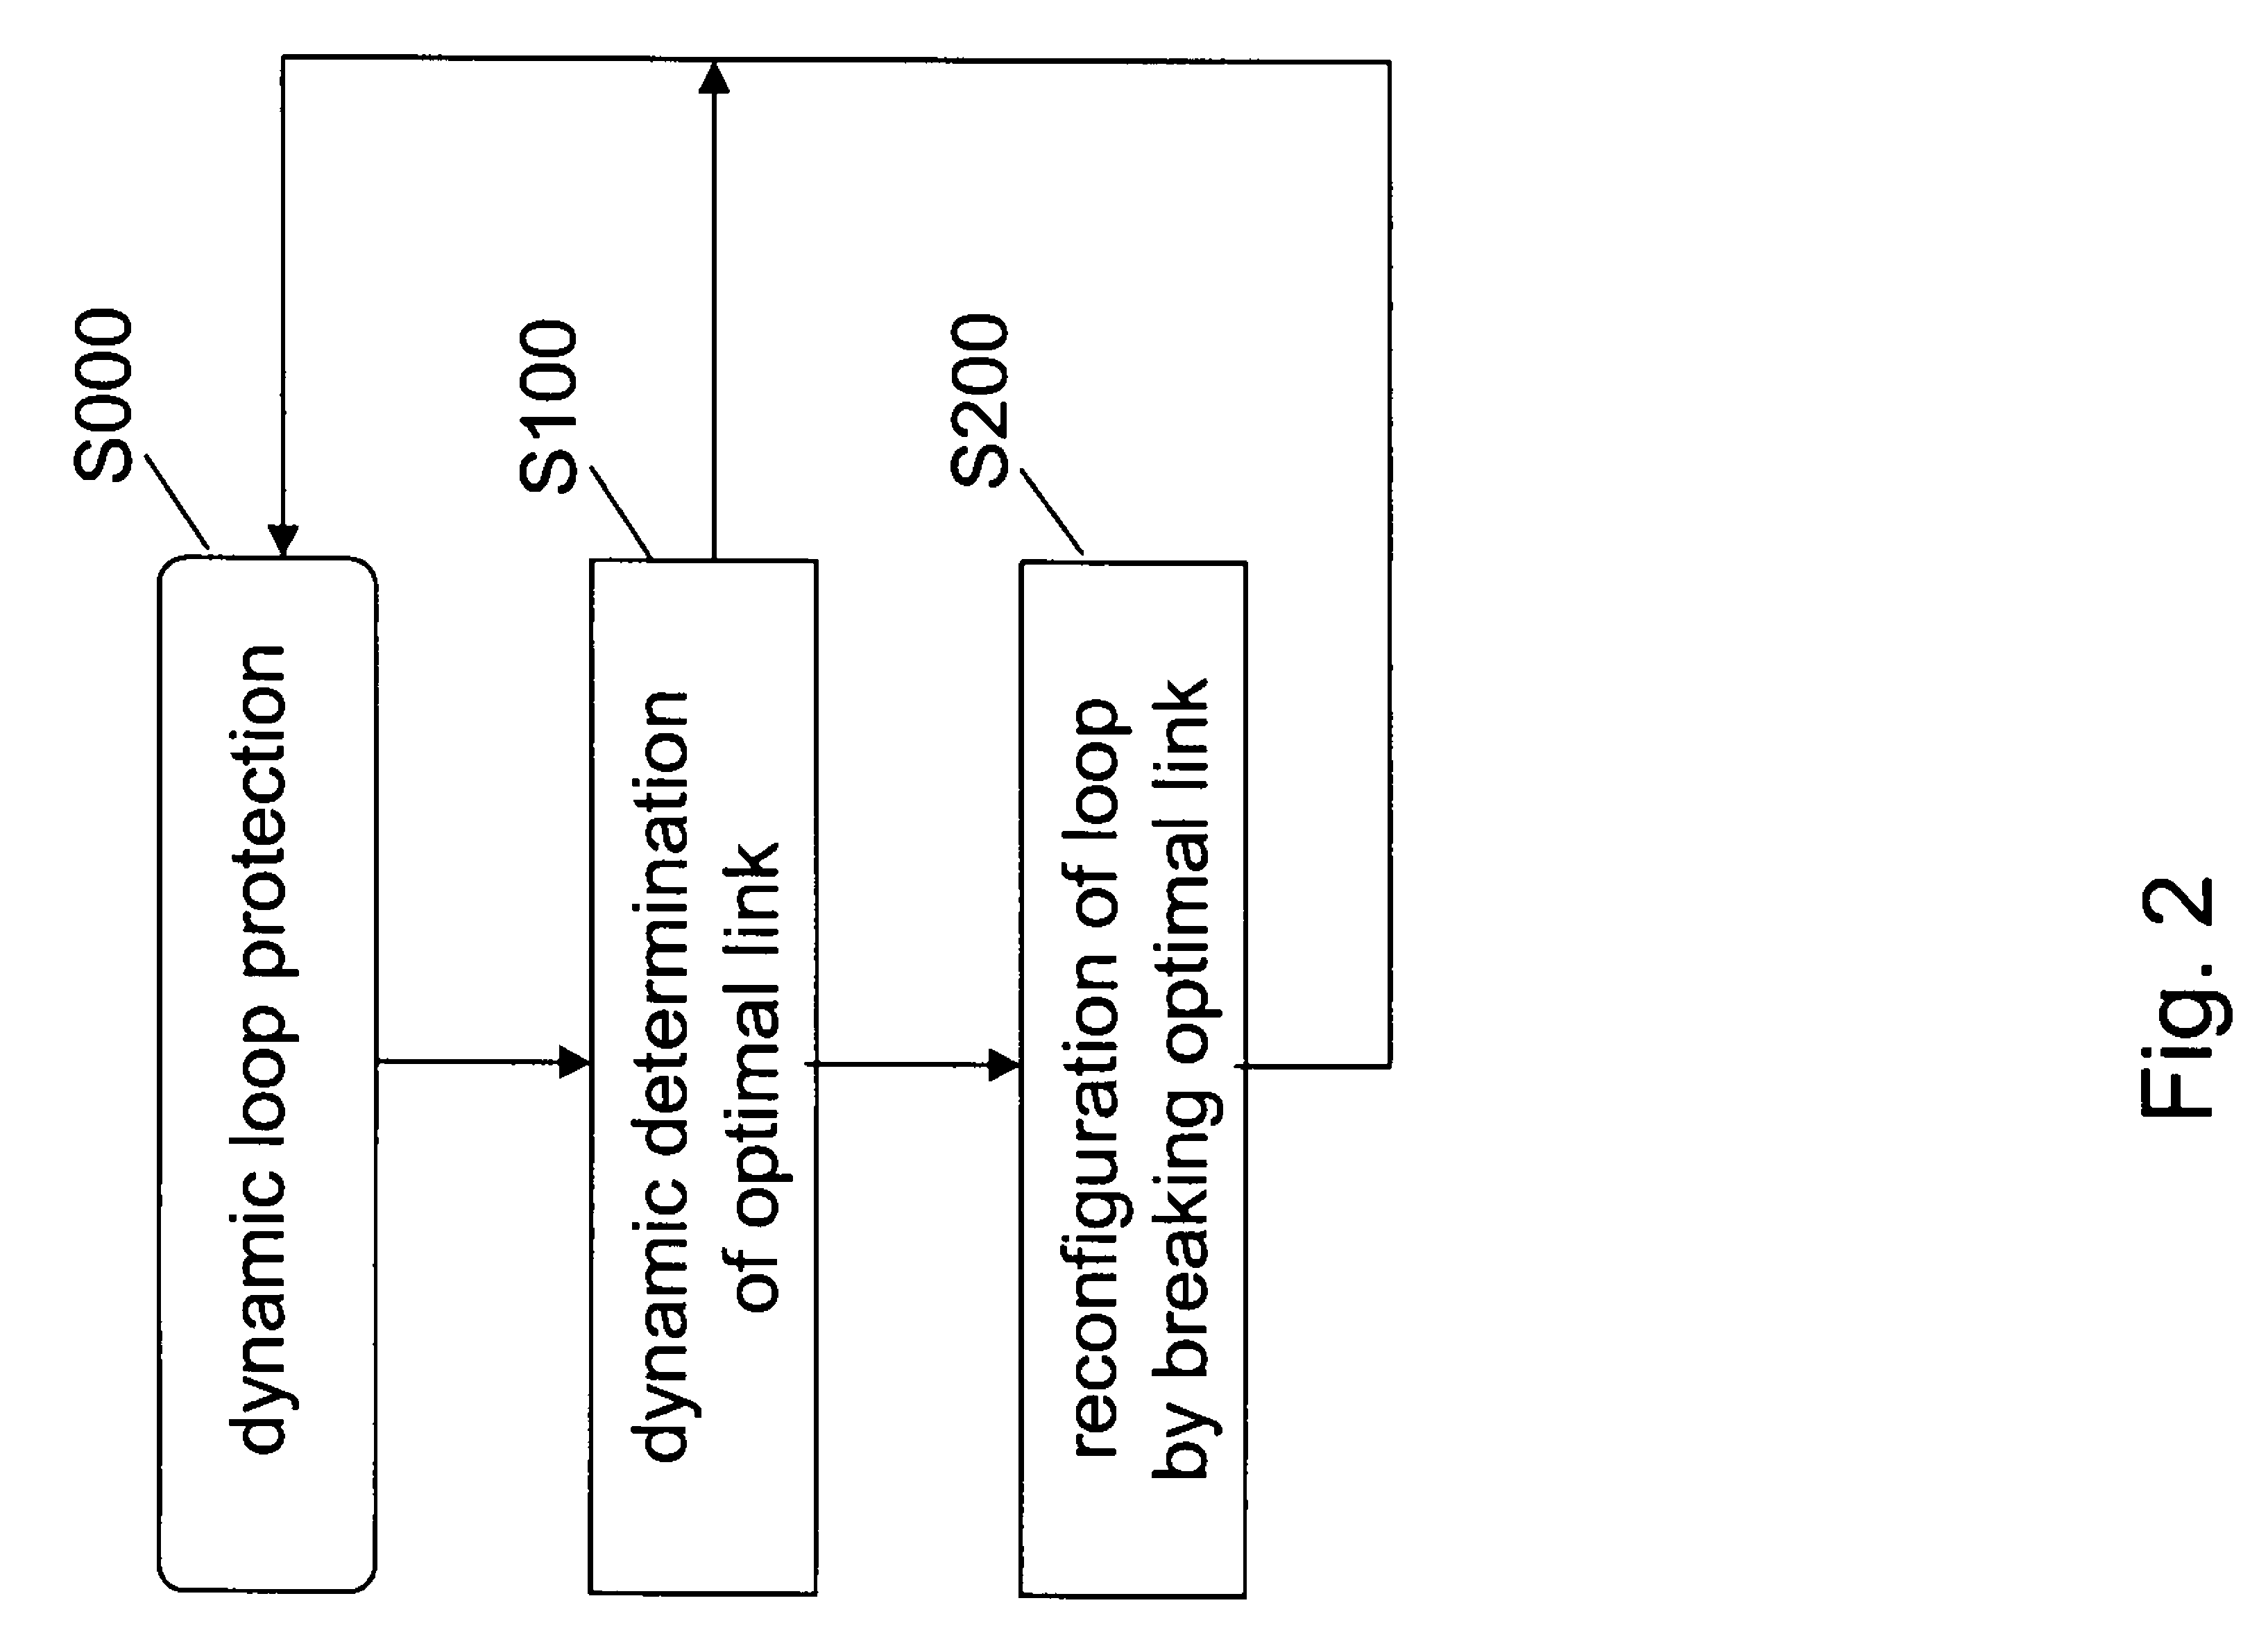 Traffic protection in a communication network